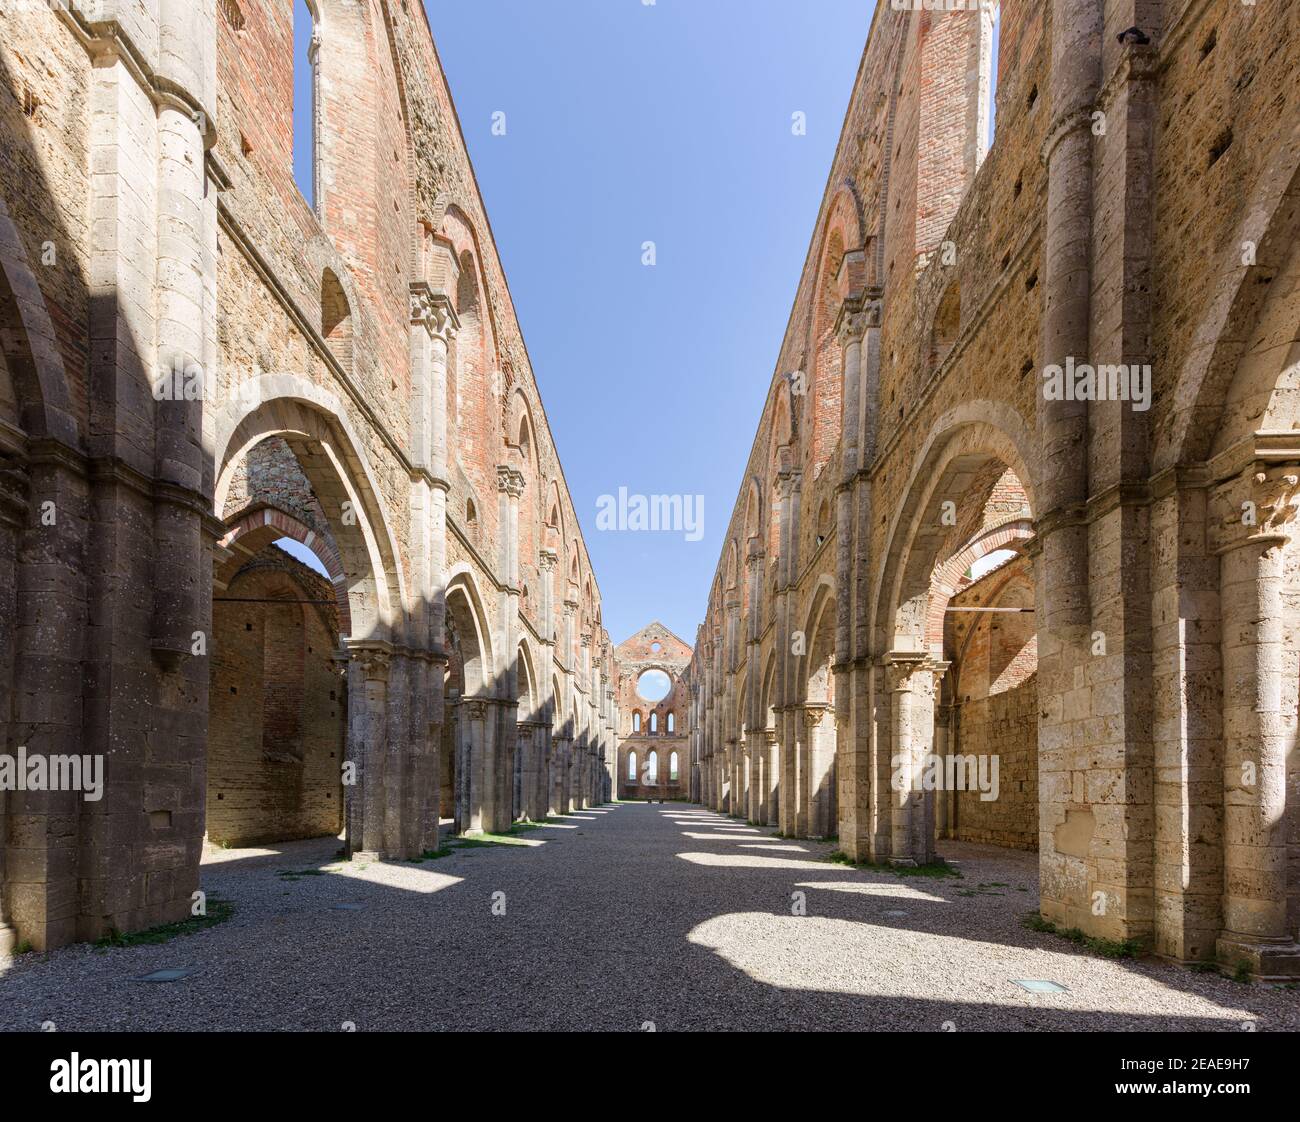 Perspective of the central nave of abandoned San Galgano Abbey, a Cistercian monastery from the Middle Ages built in Chiusdino, a Tuscany countryside Stock Photo